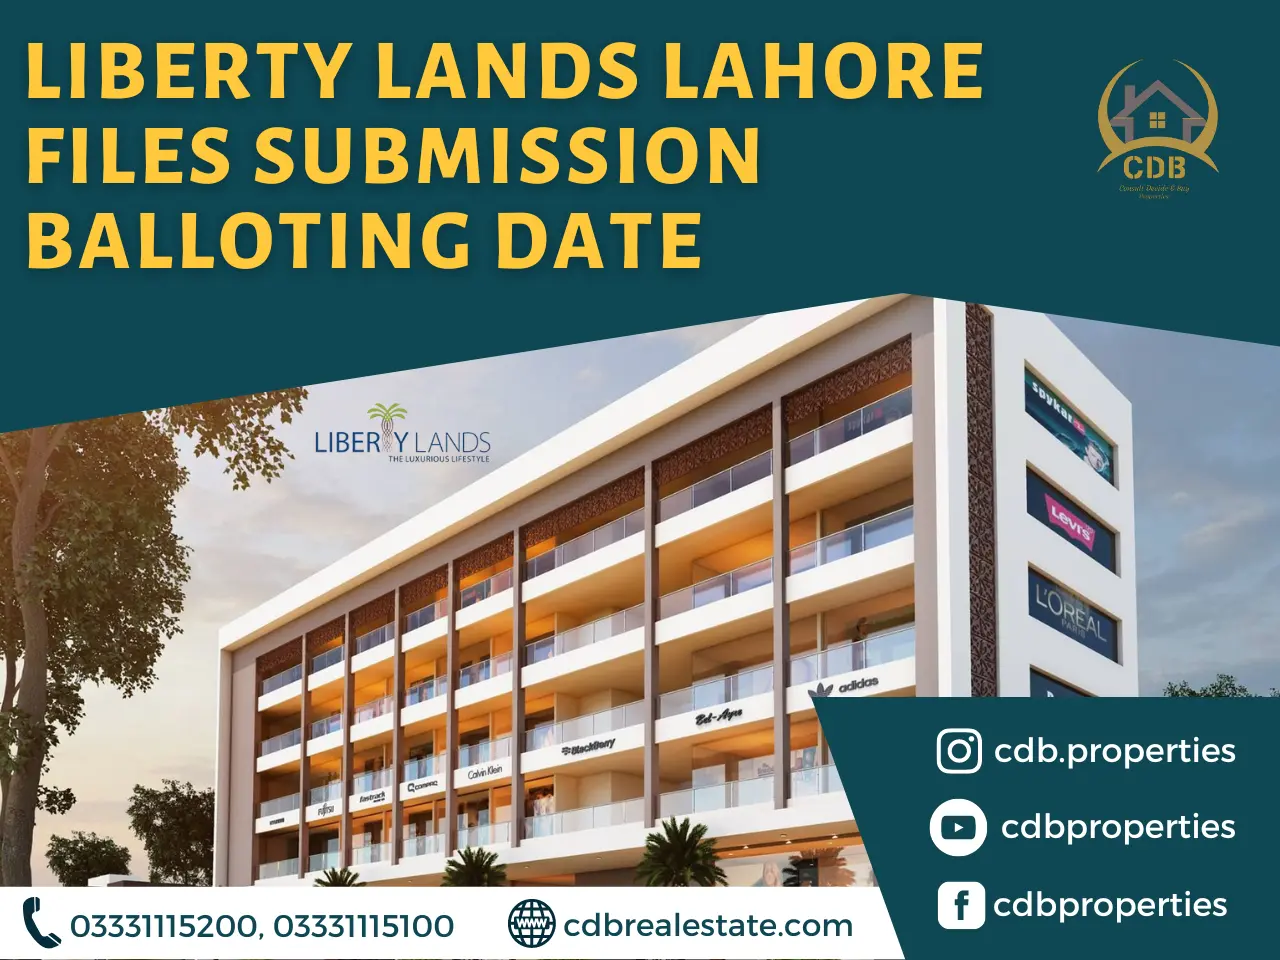 Liberty Lands Lahore Files Submission and Balloting Date